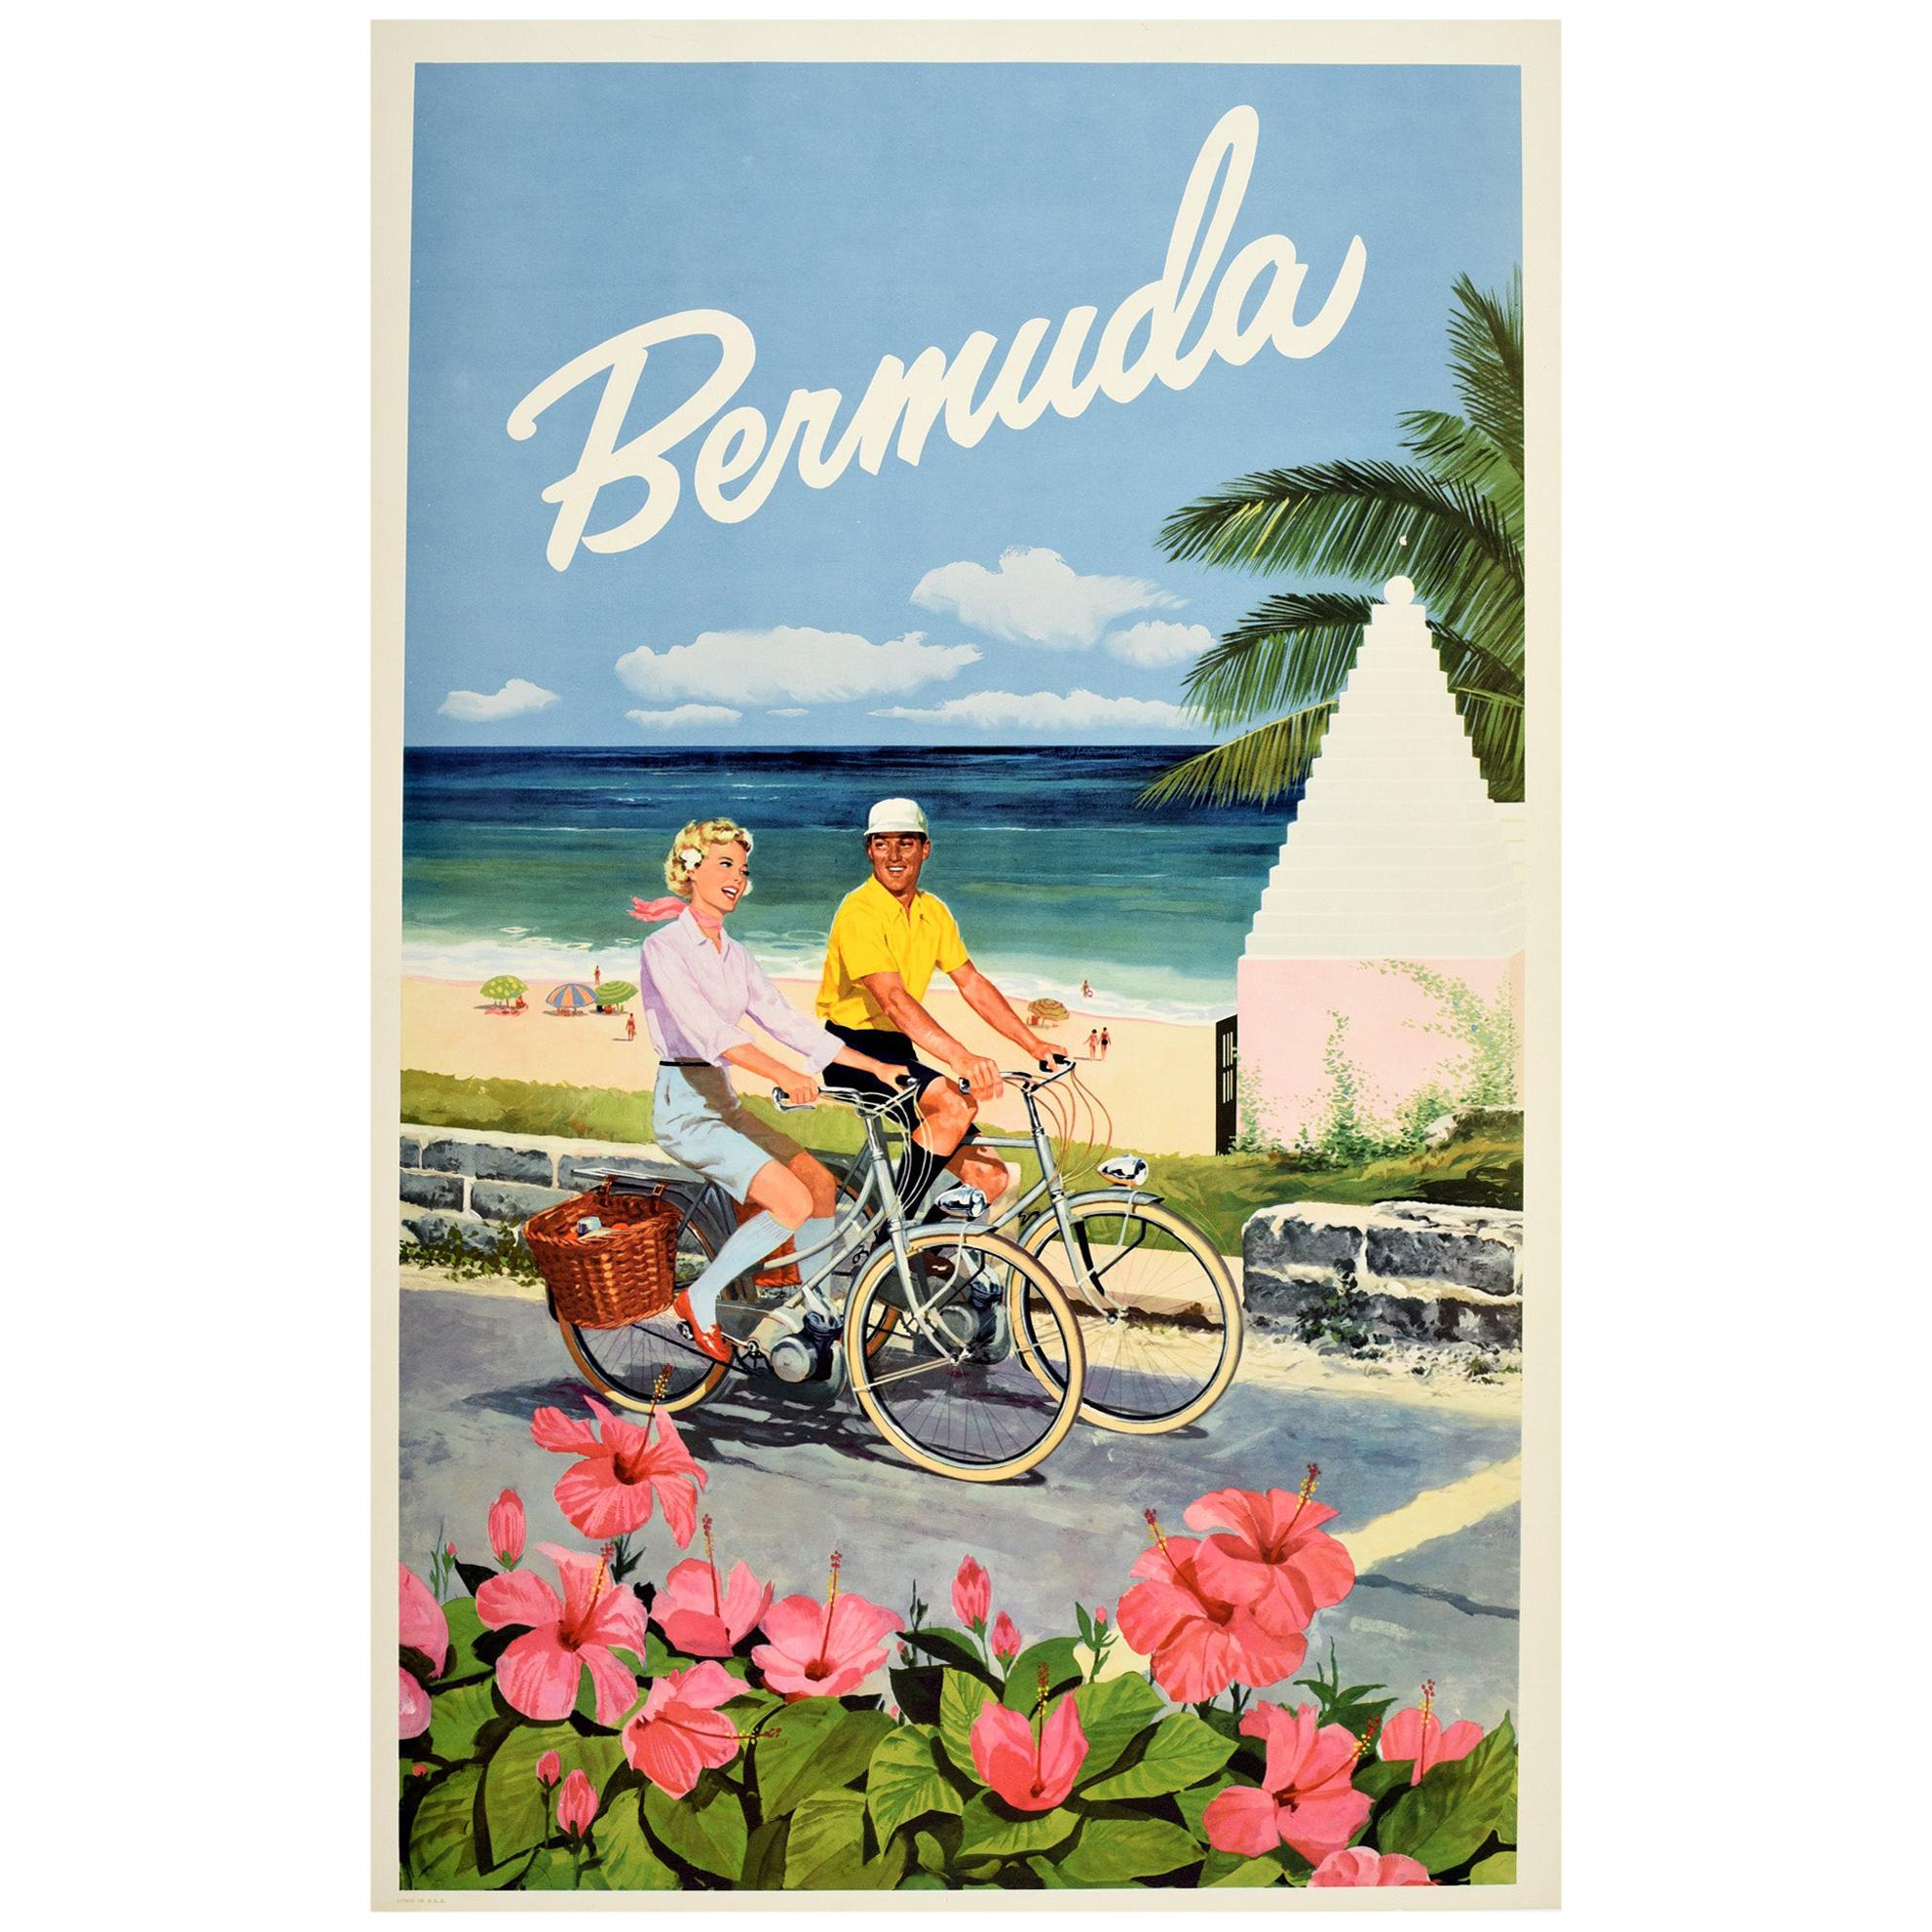 Original Vintage Travel Poster for Bermuda Ft. Flowers Cycling Sandy Beach View